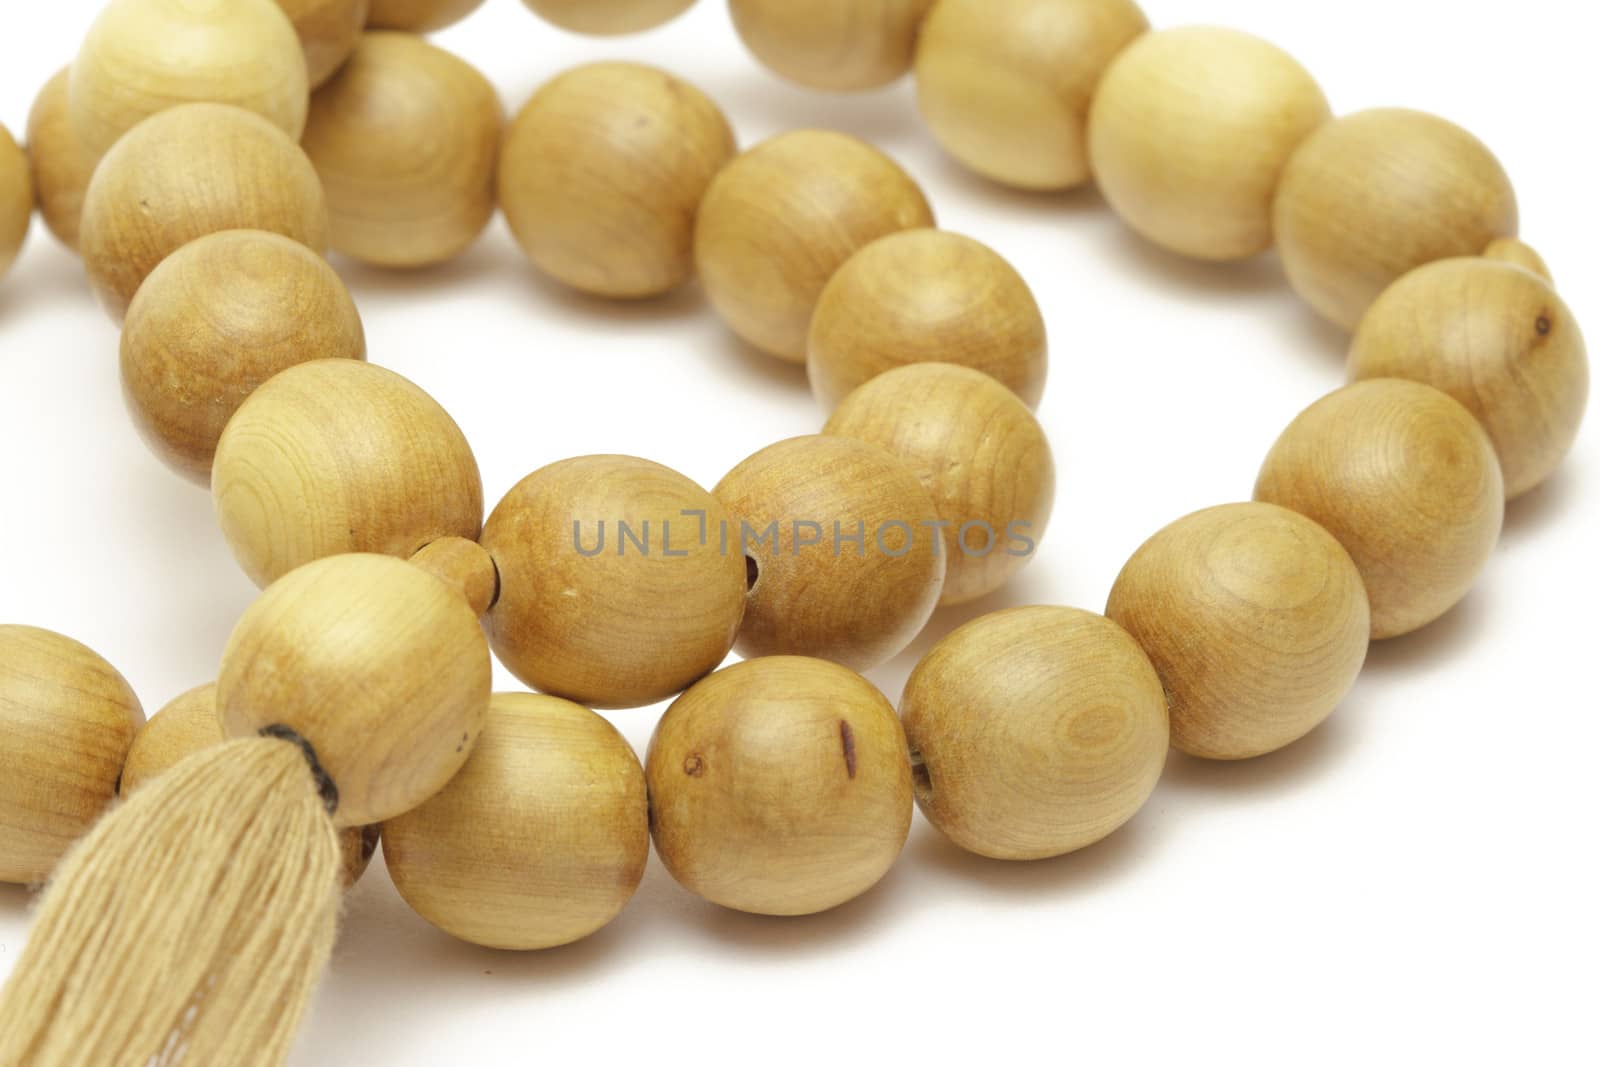 Wooden rosary on white background